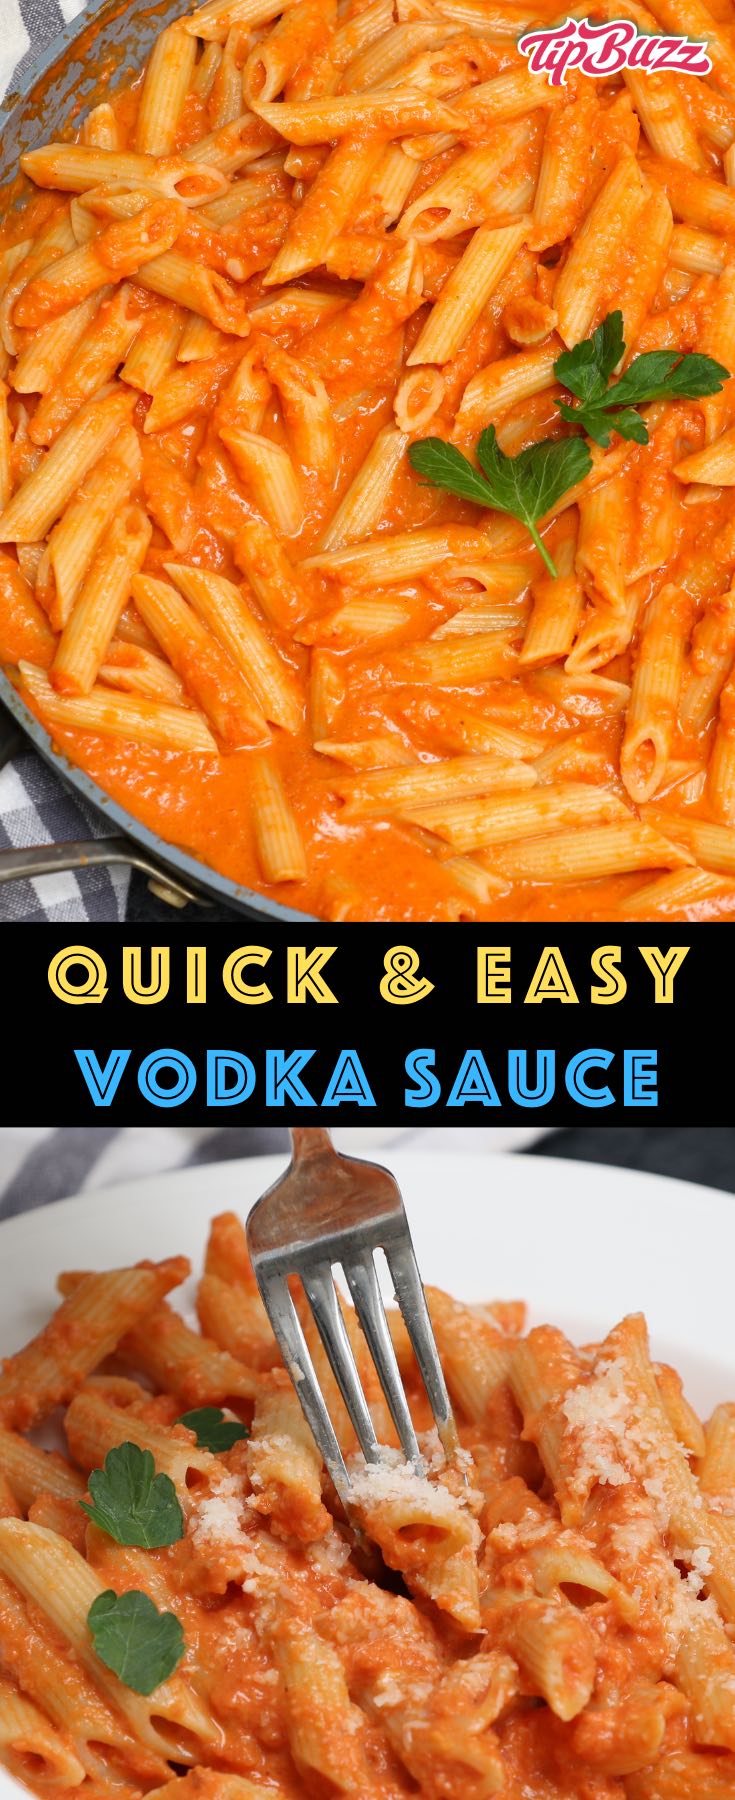 Vodka Sauce - learn how to make this delicious sauce for penne alla vodka! #vodkasauce